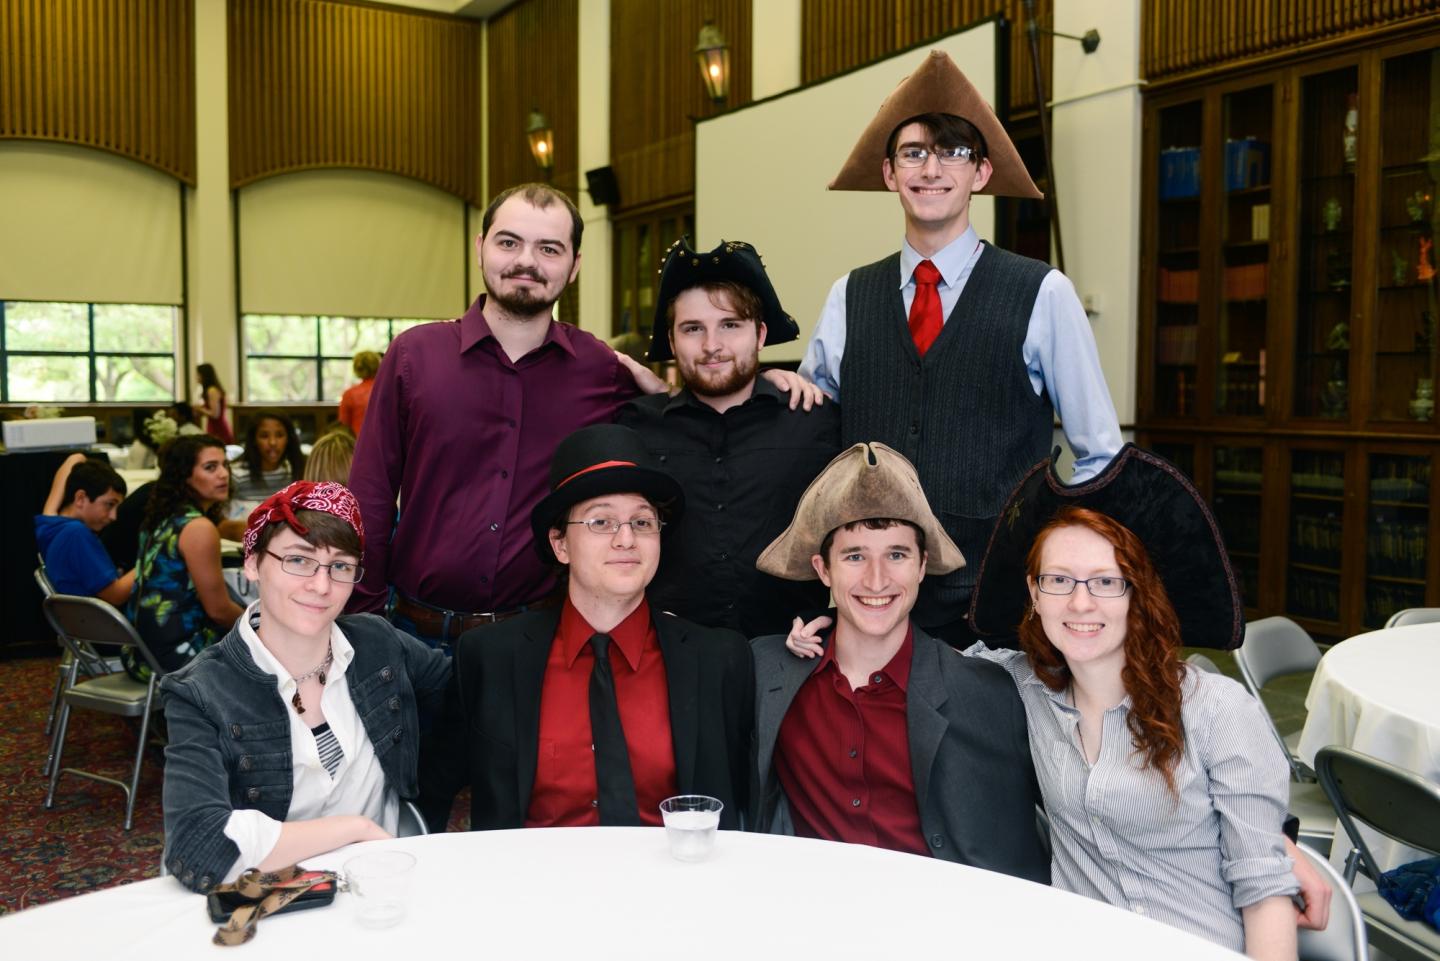 7 members of the Swashbucklers hall wear pirate hats at a leadership awards ceremony